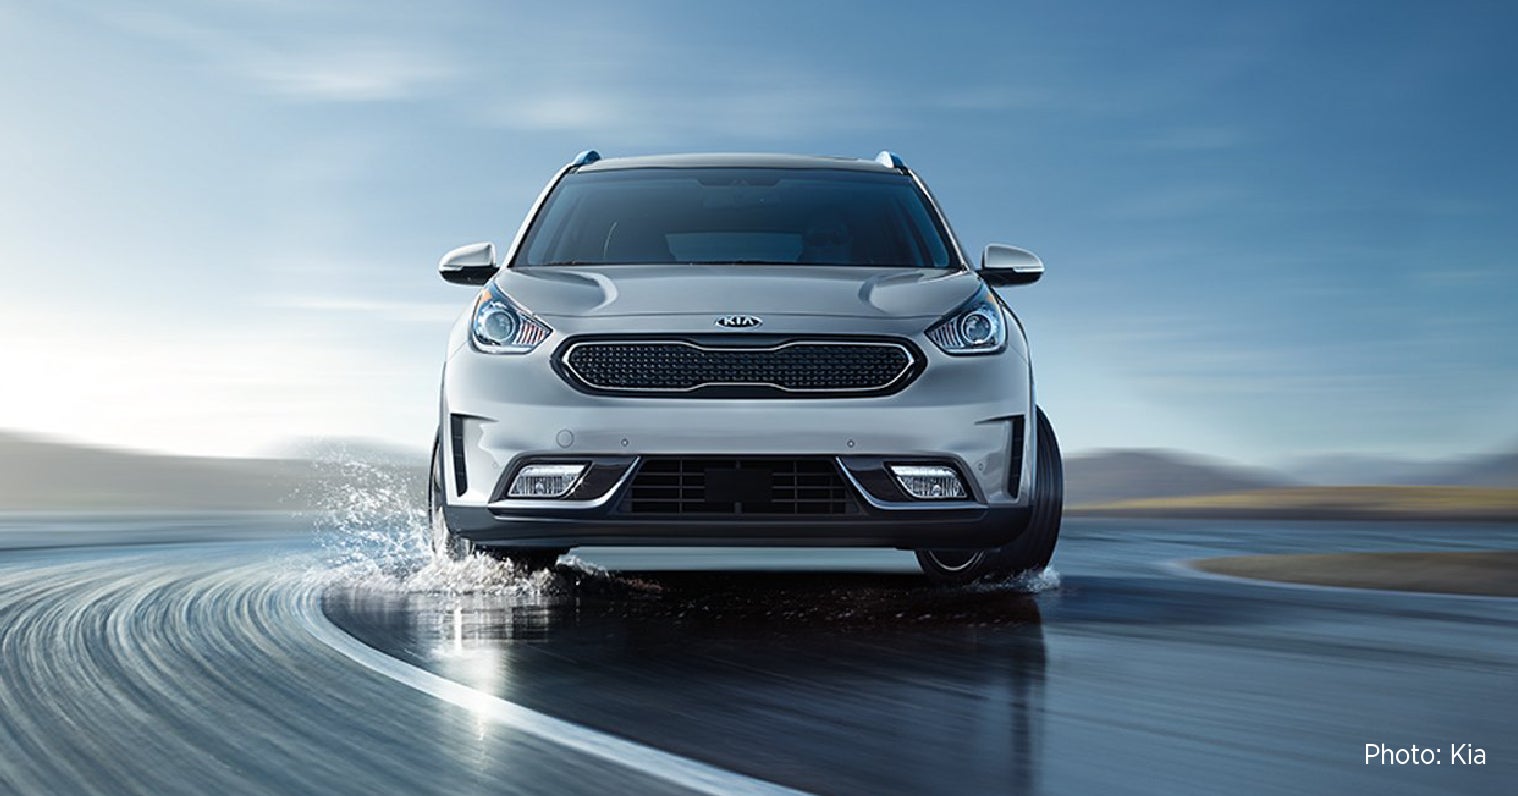 You Need to Know About Charging the Kia EV and PHEV |